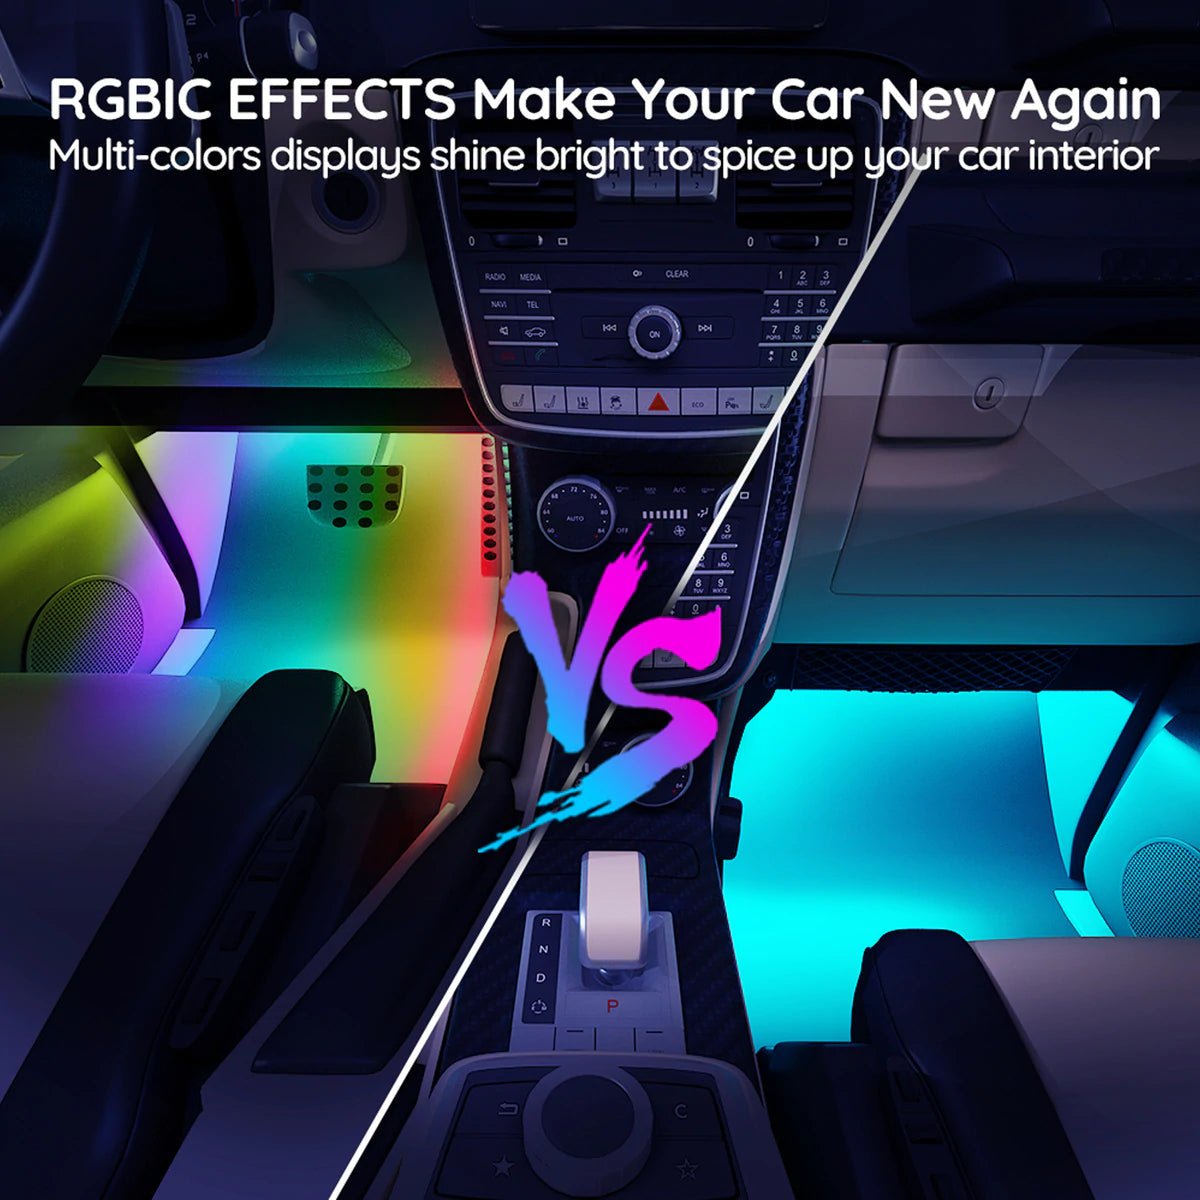 Govee RGBIC Interior Car Lights with Remote Control - Store 974 | ستور ٩٧٤